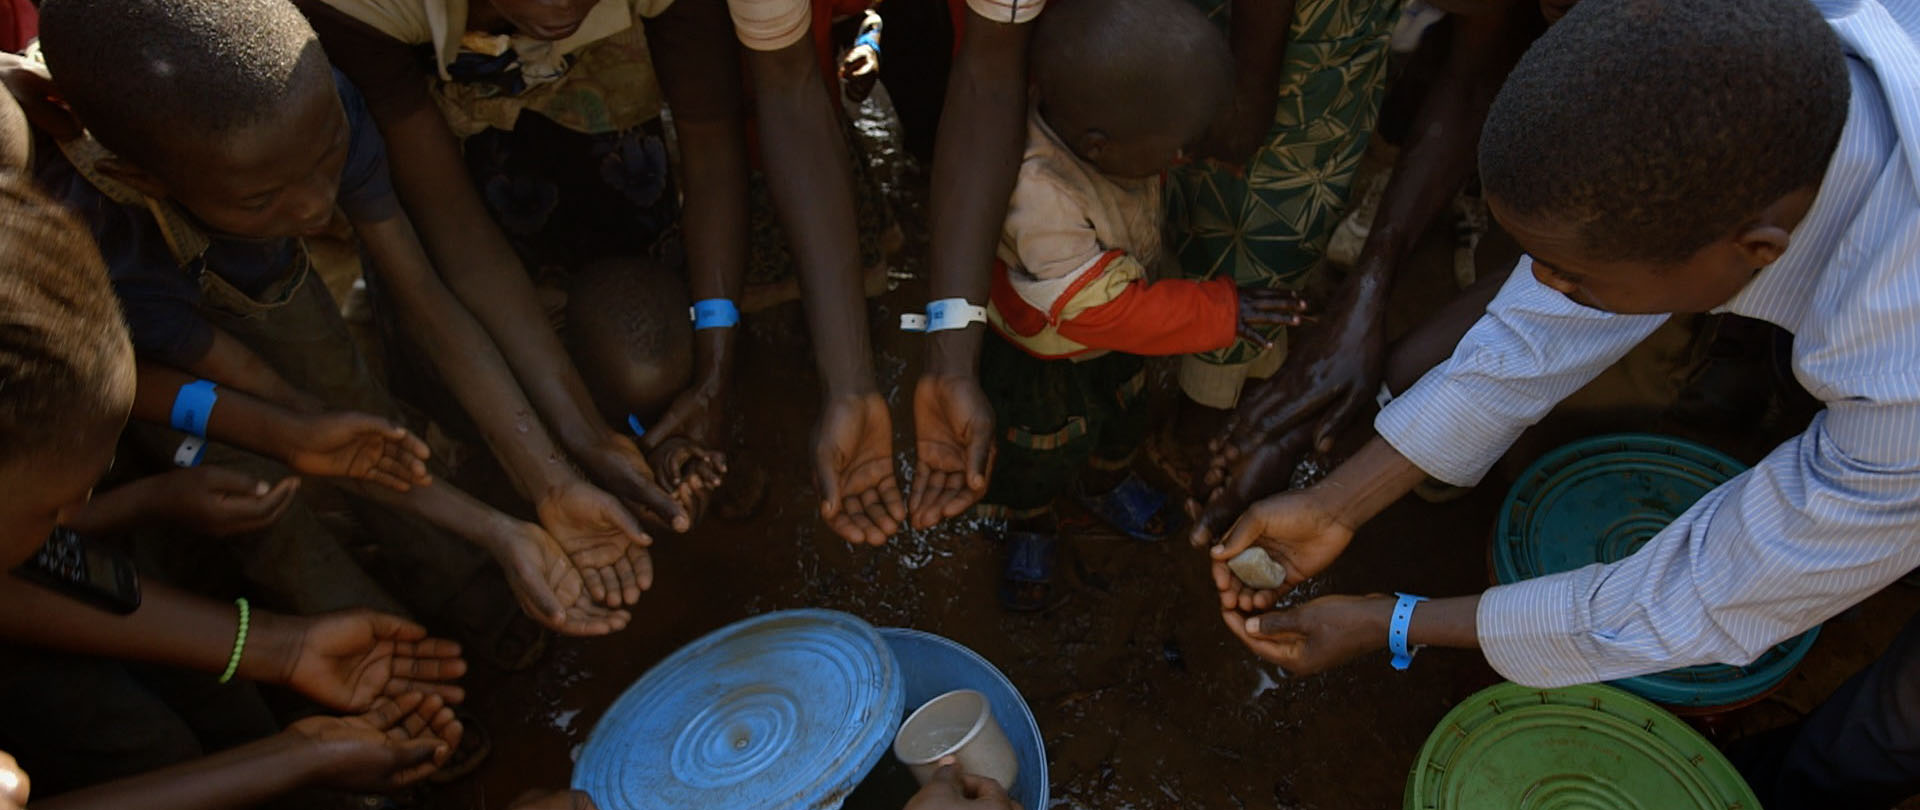 Recent arrivals to a Tanzanian camp share a bar of soap to wash hands.